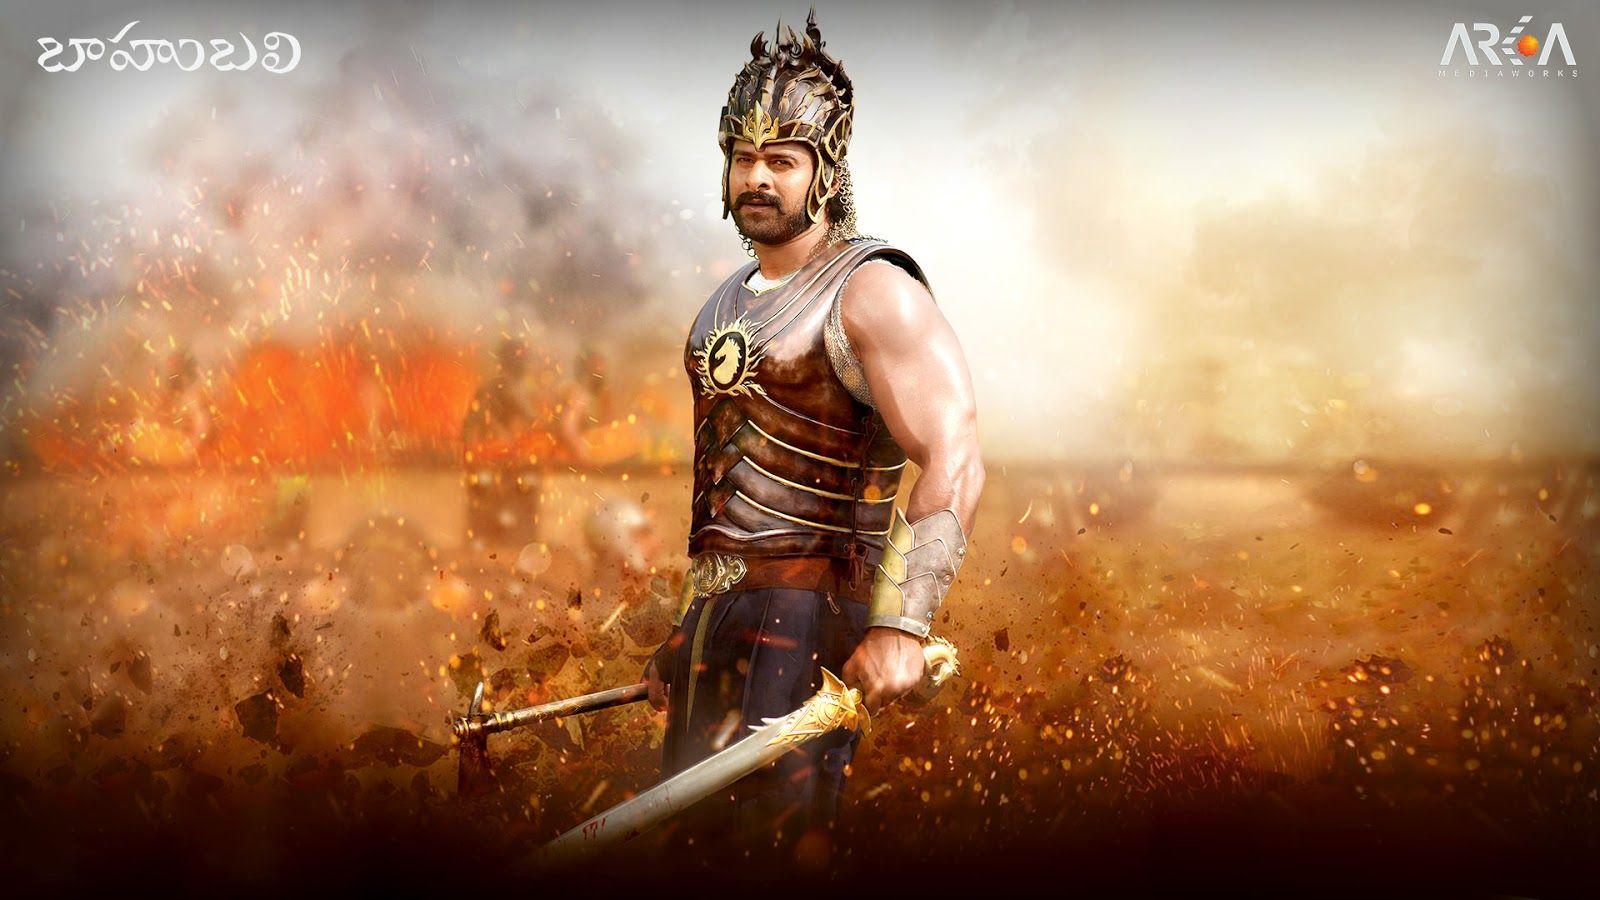 HD wallpaper Movie Baahubali 2 The Conclusion architecture men adult   Wallpaper Flare